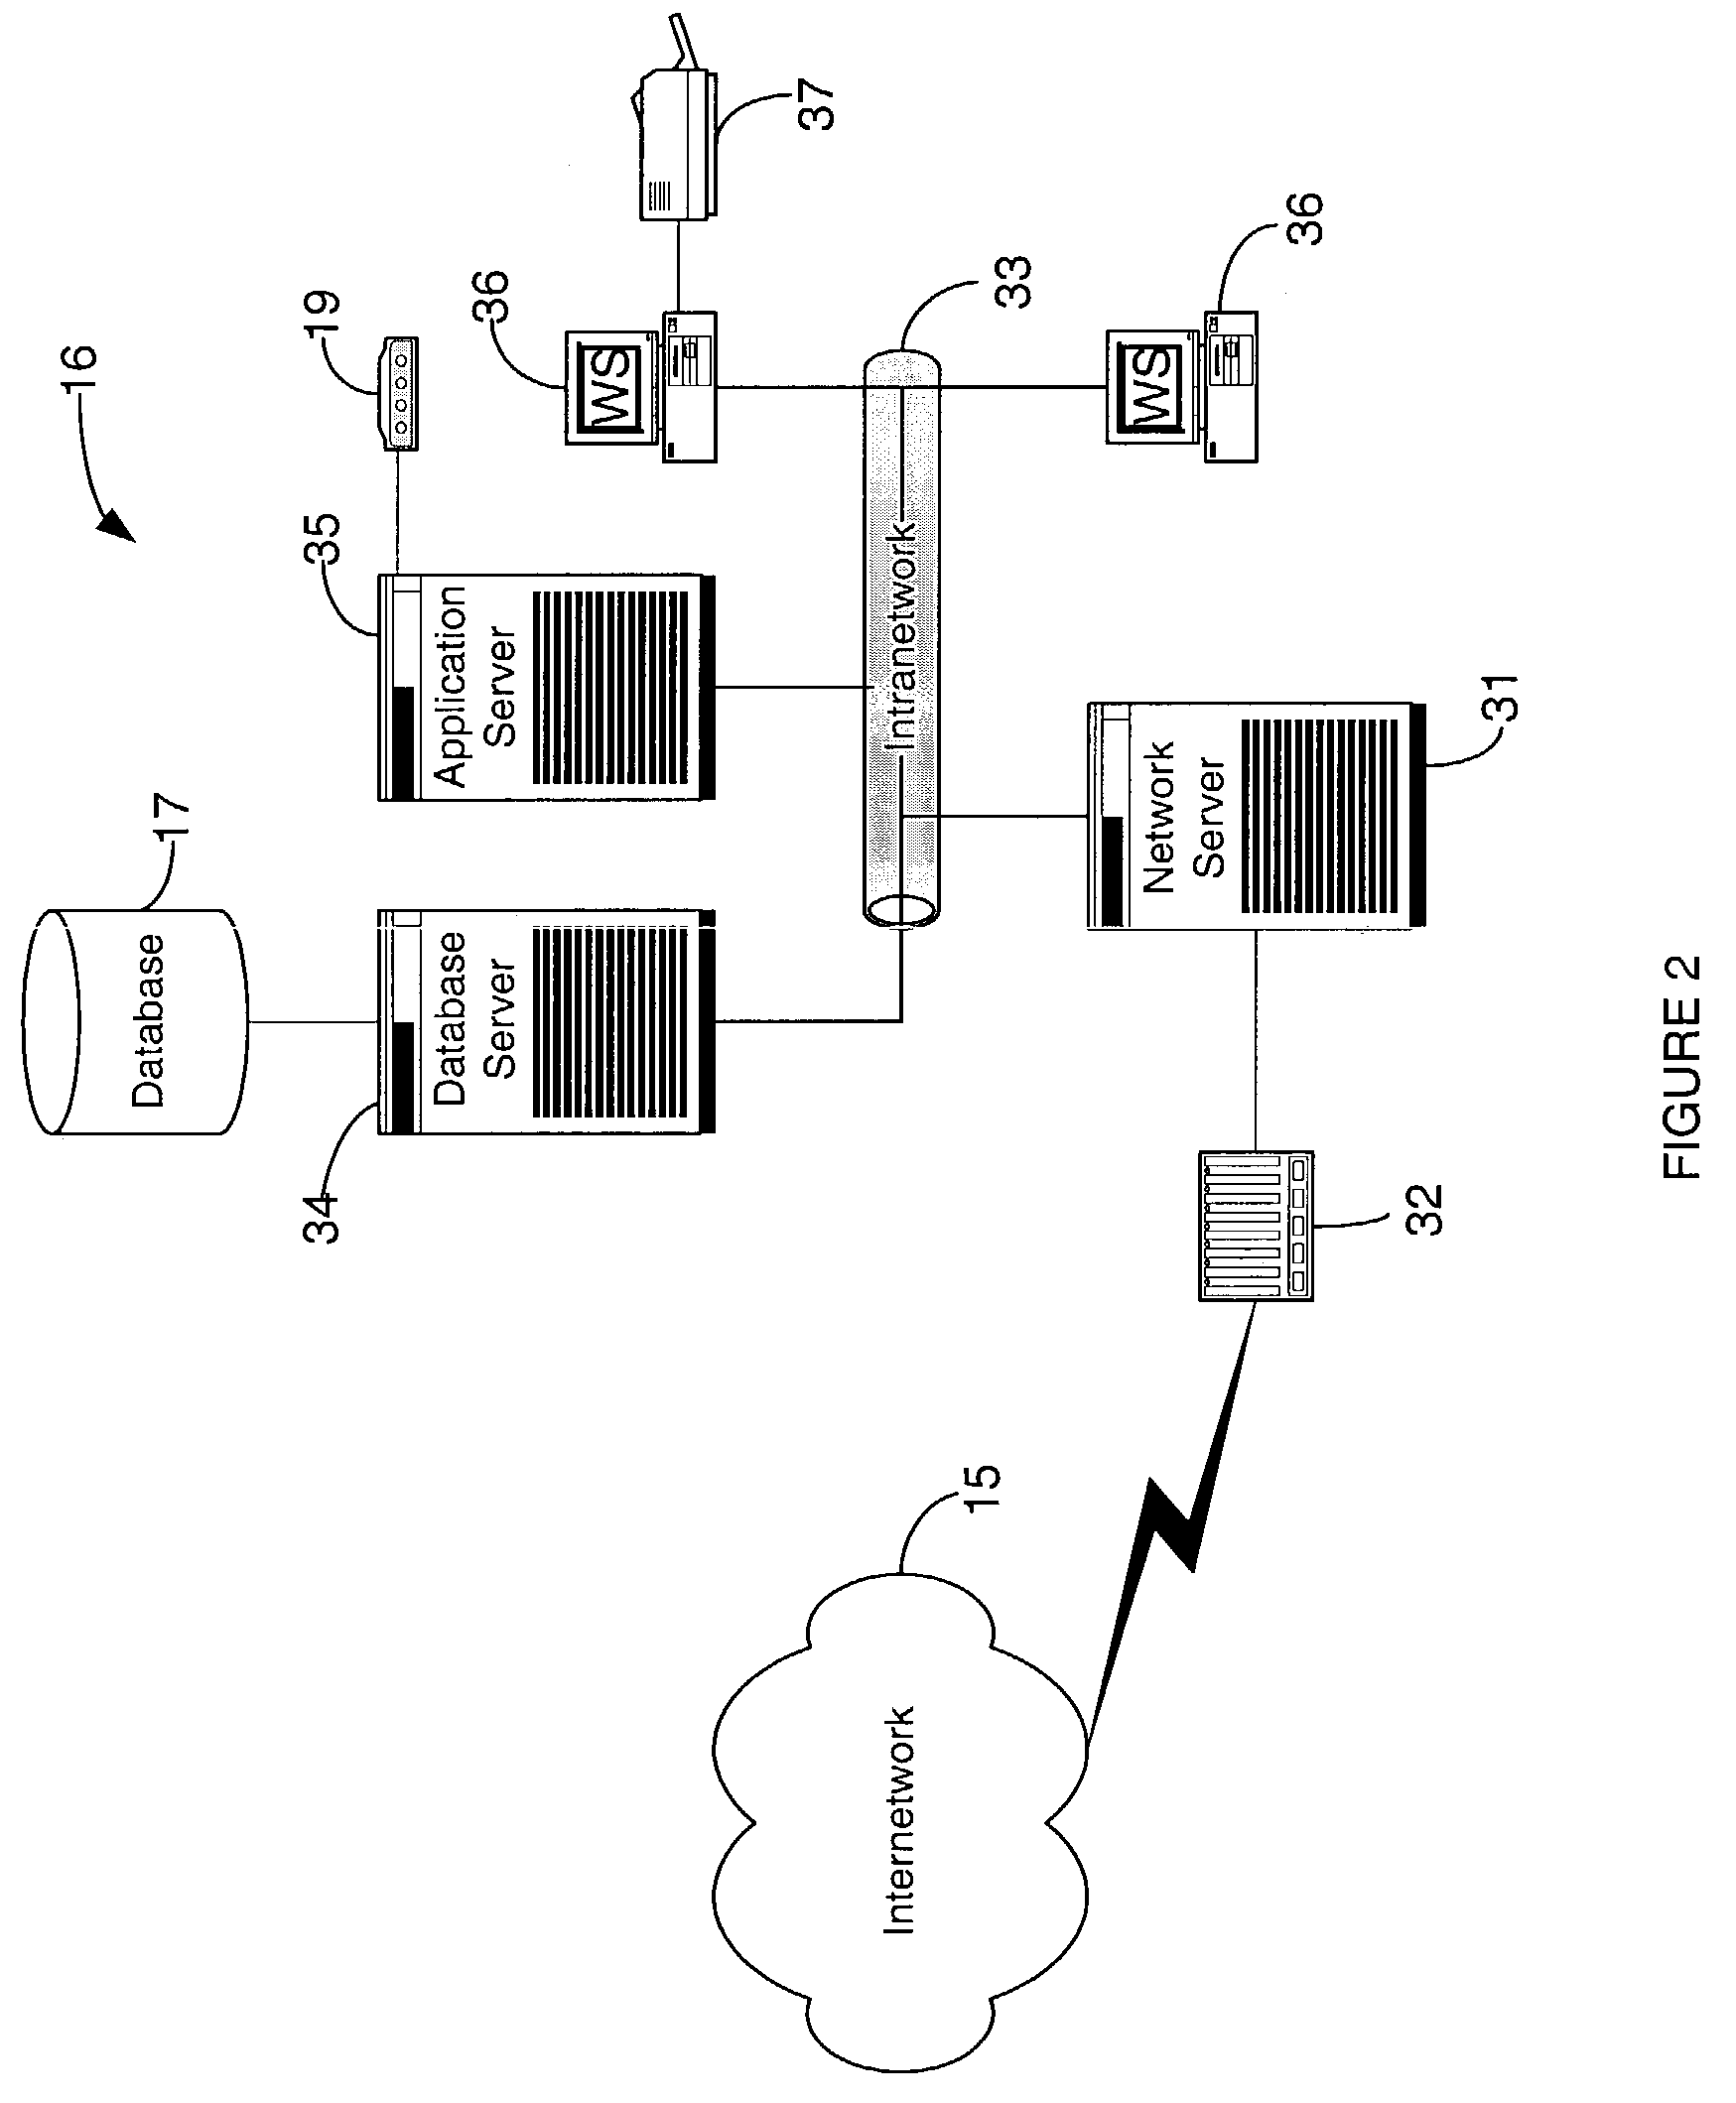 System and method for providing tiered patient feedback for use in automated patient care